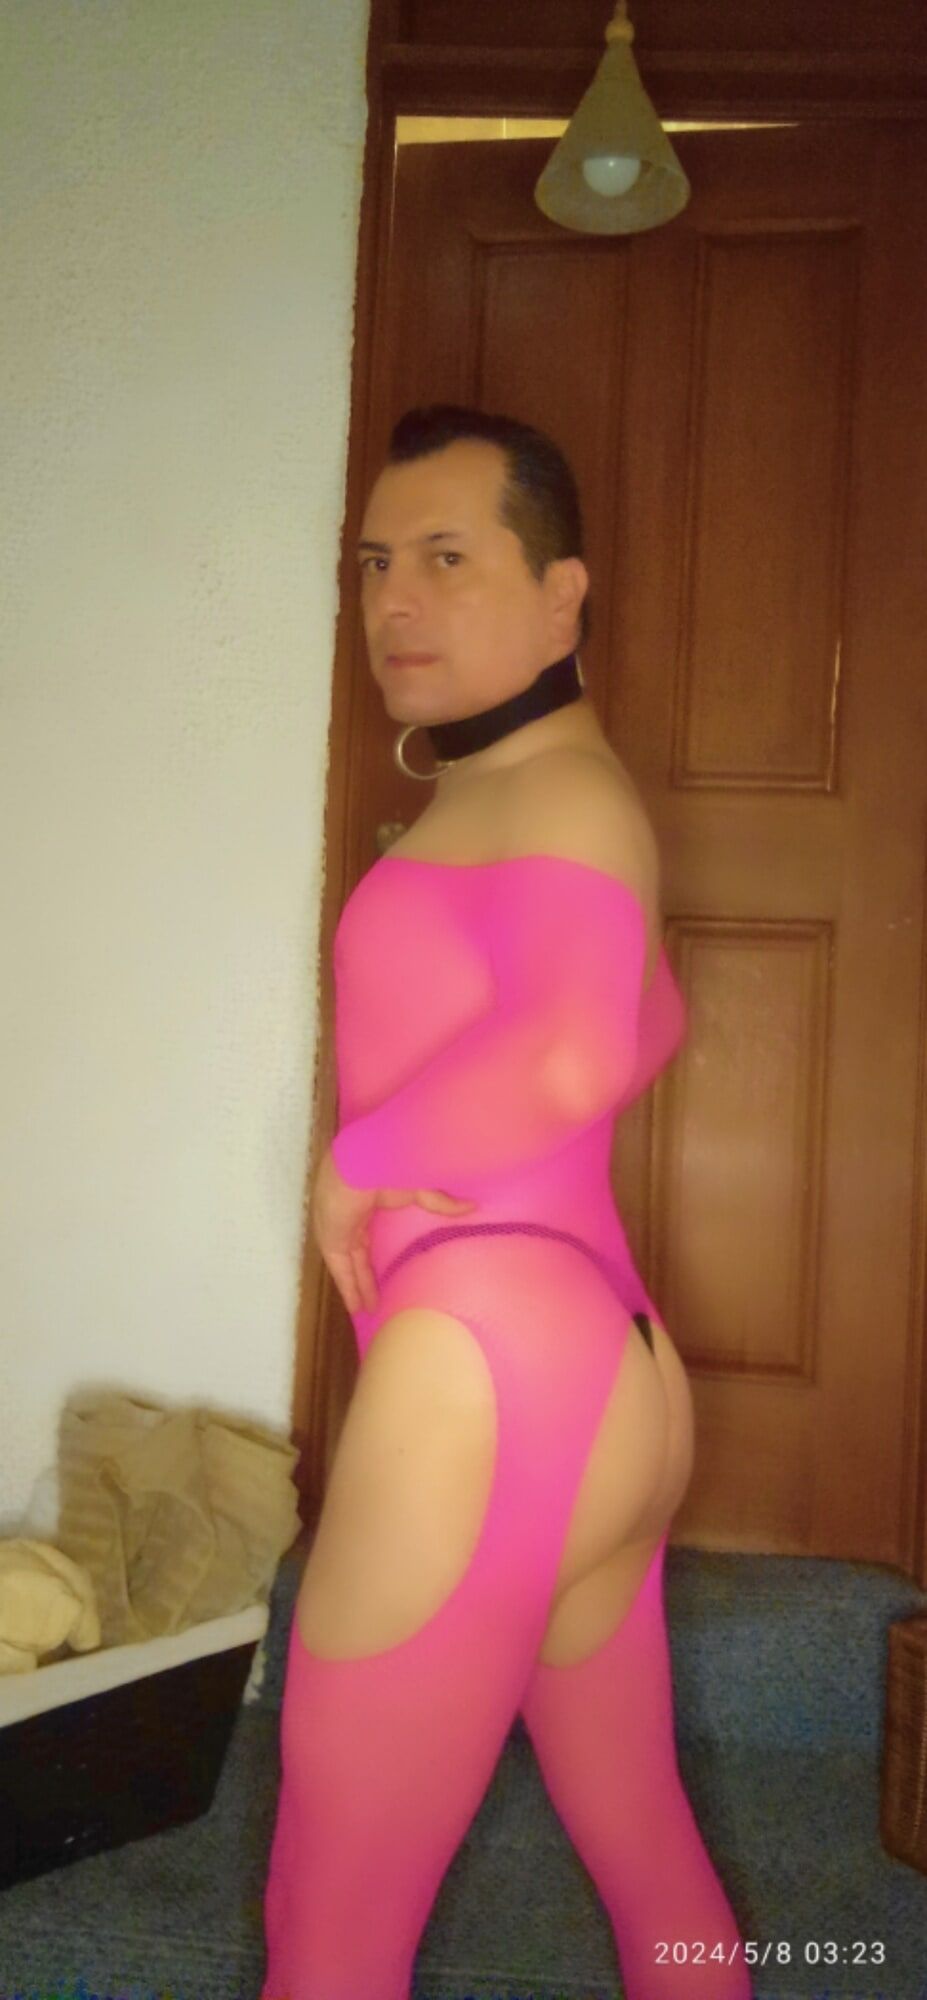 My new pink lingerie 